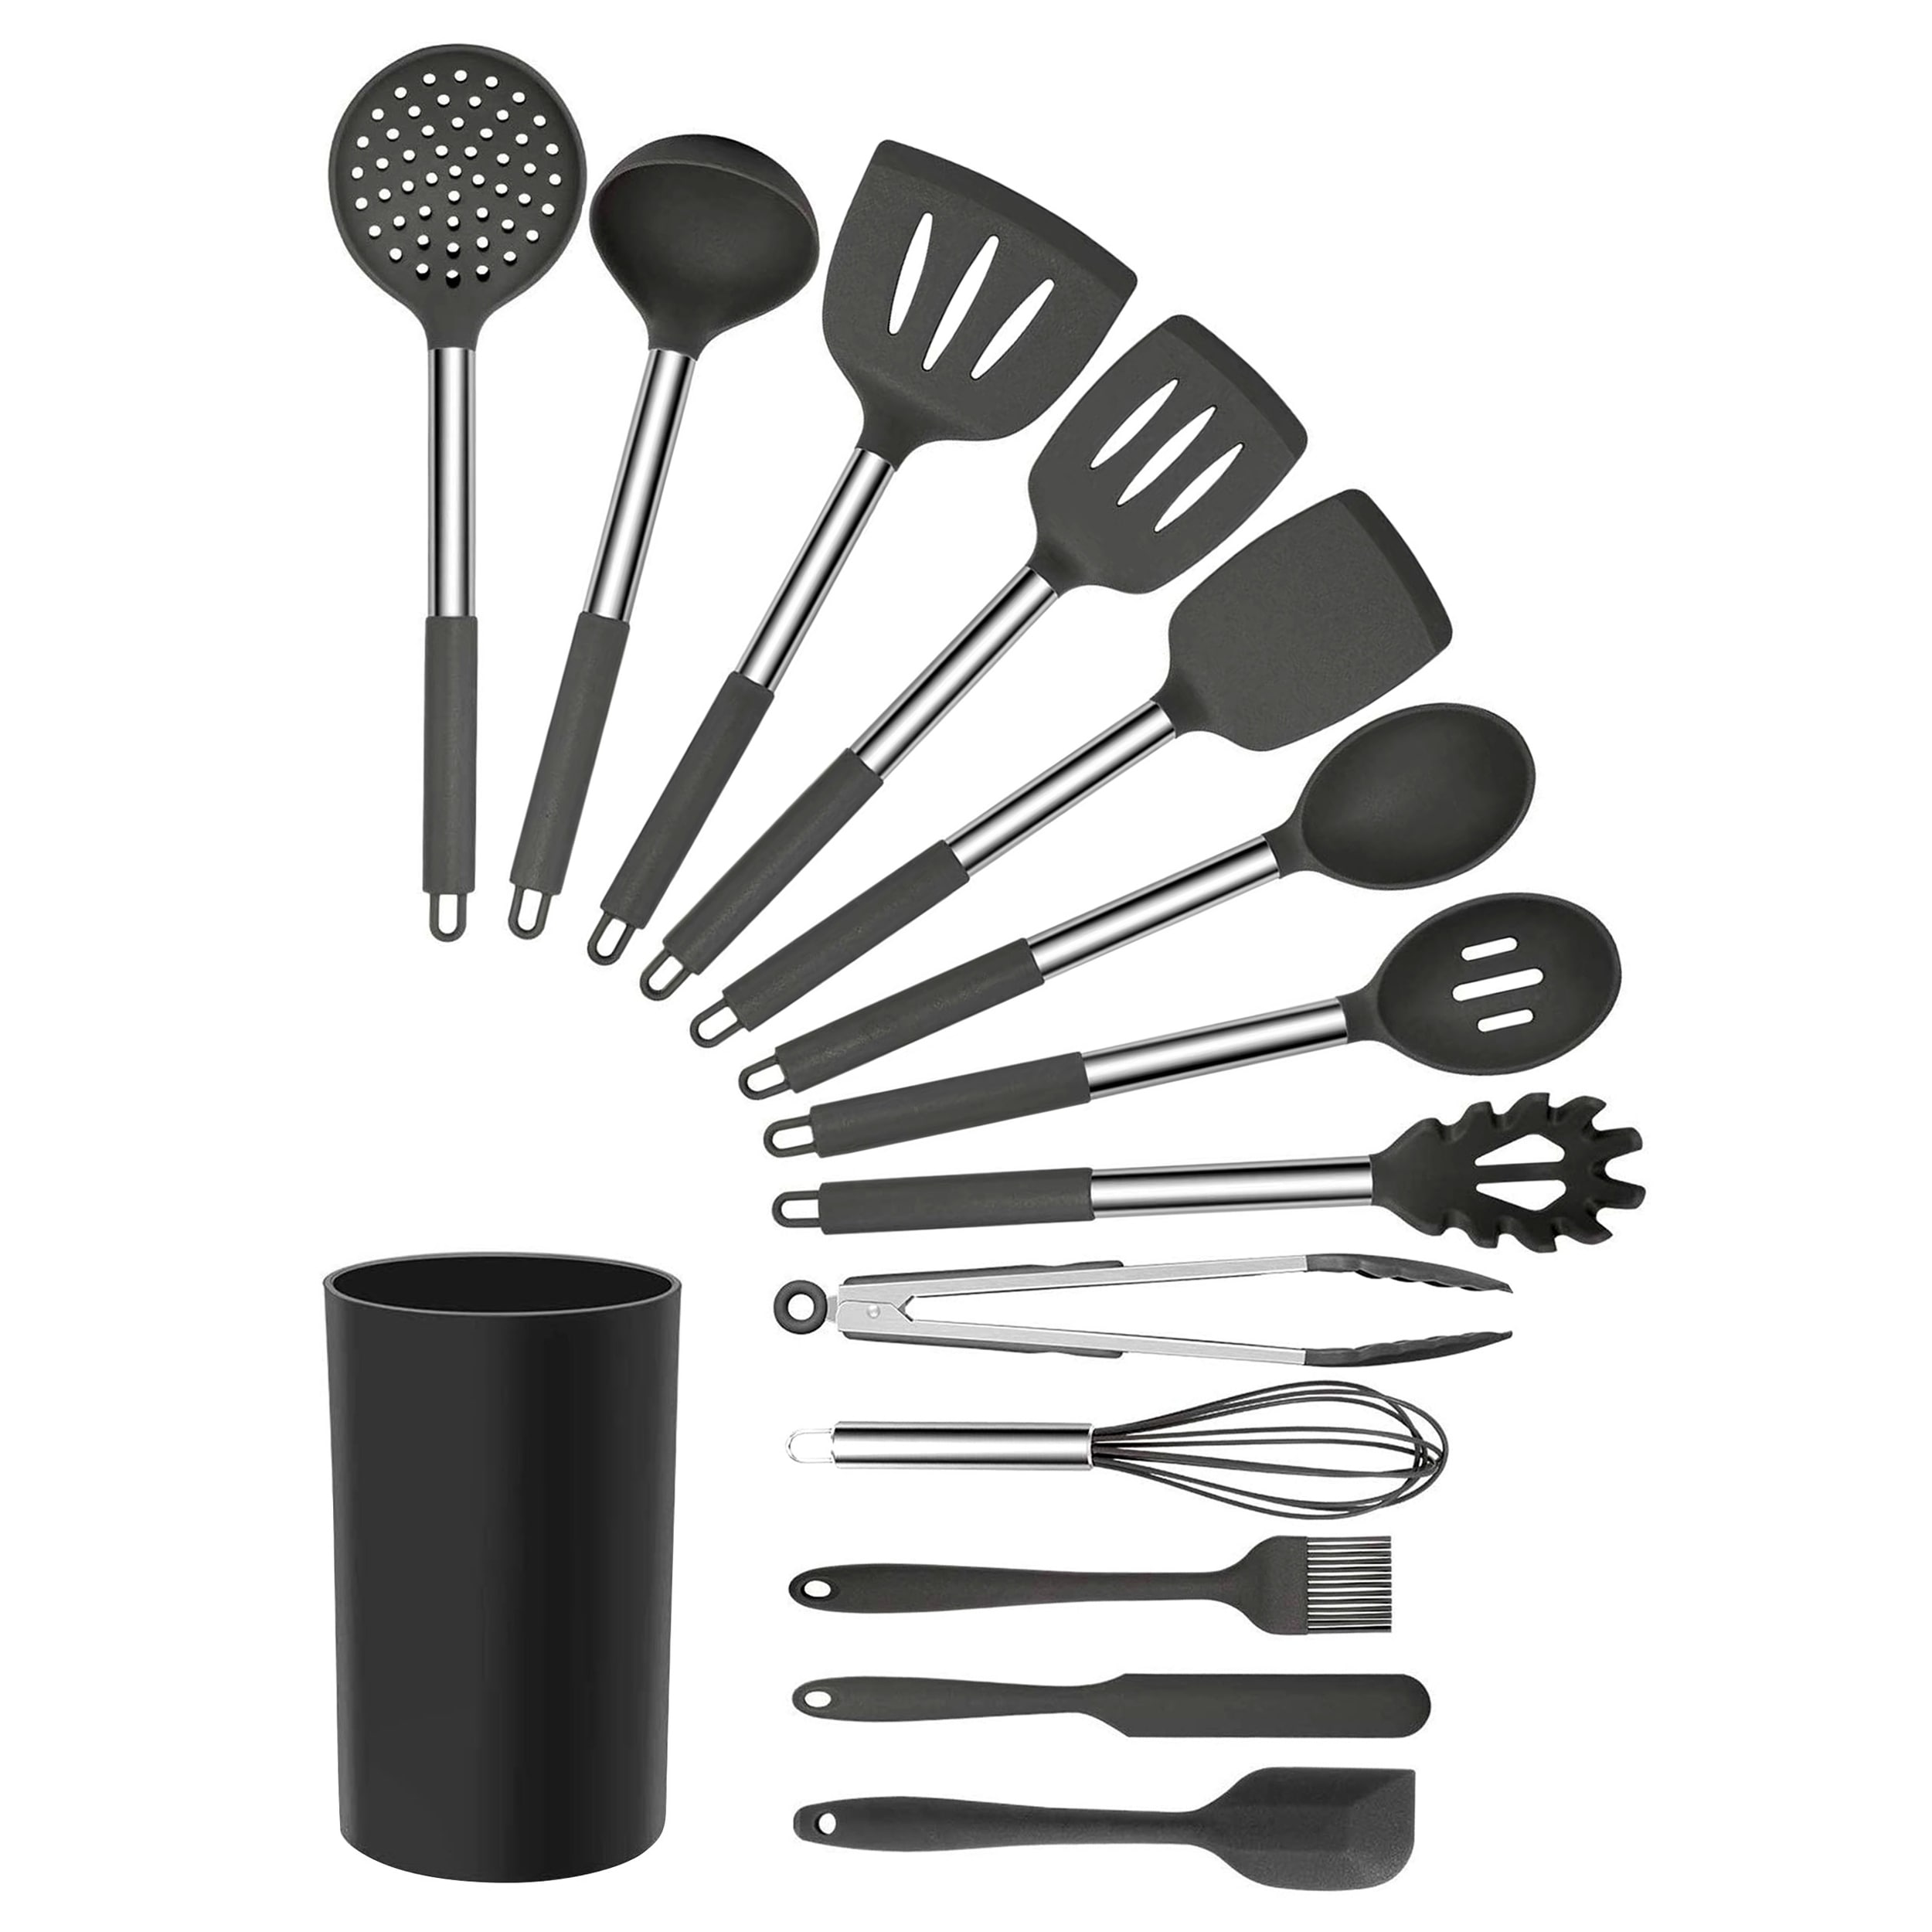 Home Kitchen Utensils Kitchen Gadgets and Tools,14PC Heat  Nylon Cookware Set Cooking Tools Kitchen & Baking Tool Kit Utensils Spoon  Turner Accessories: Bowls